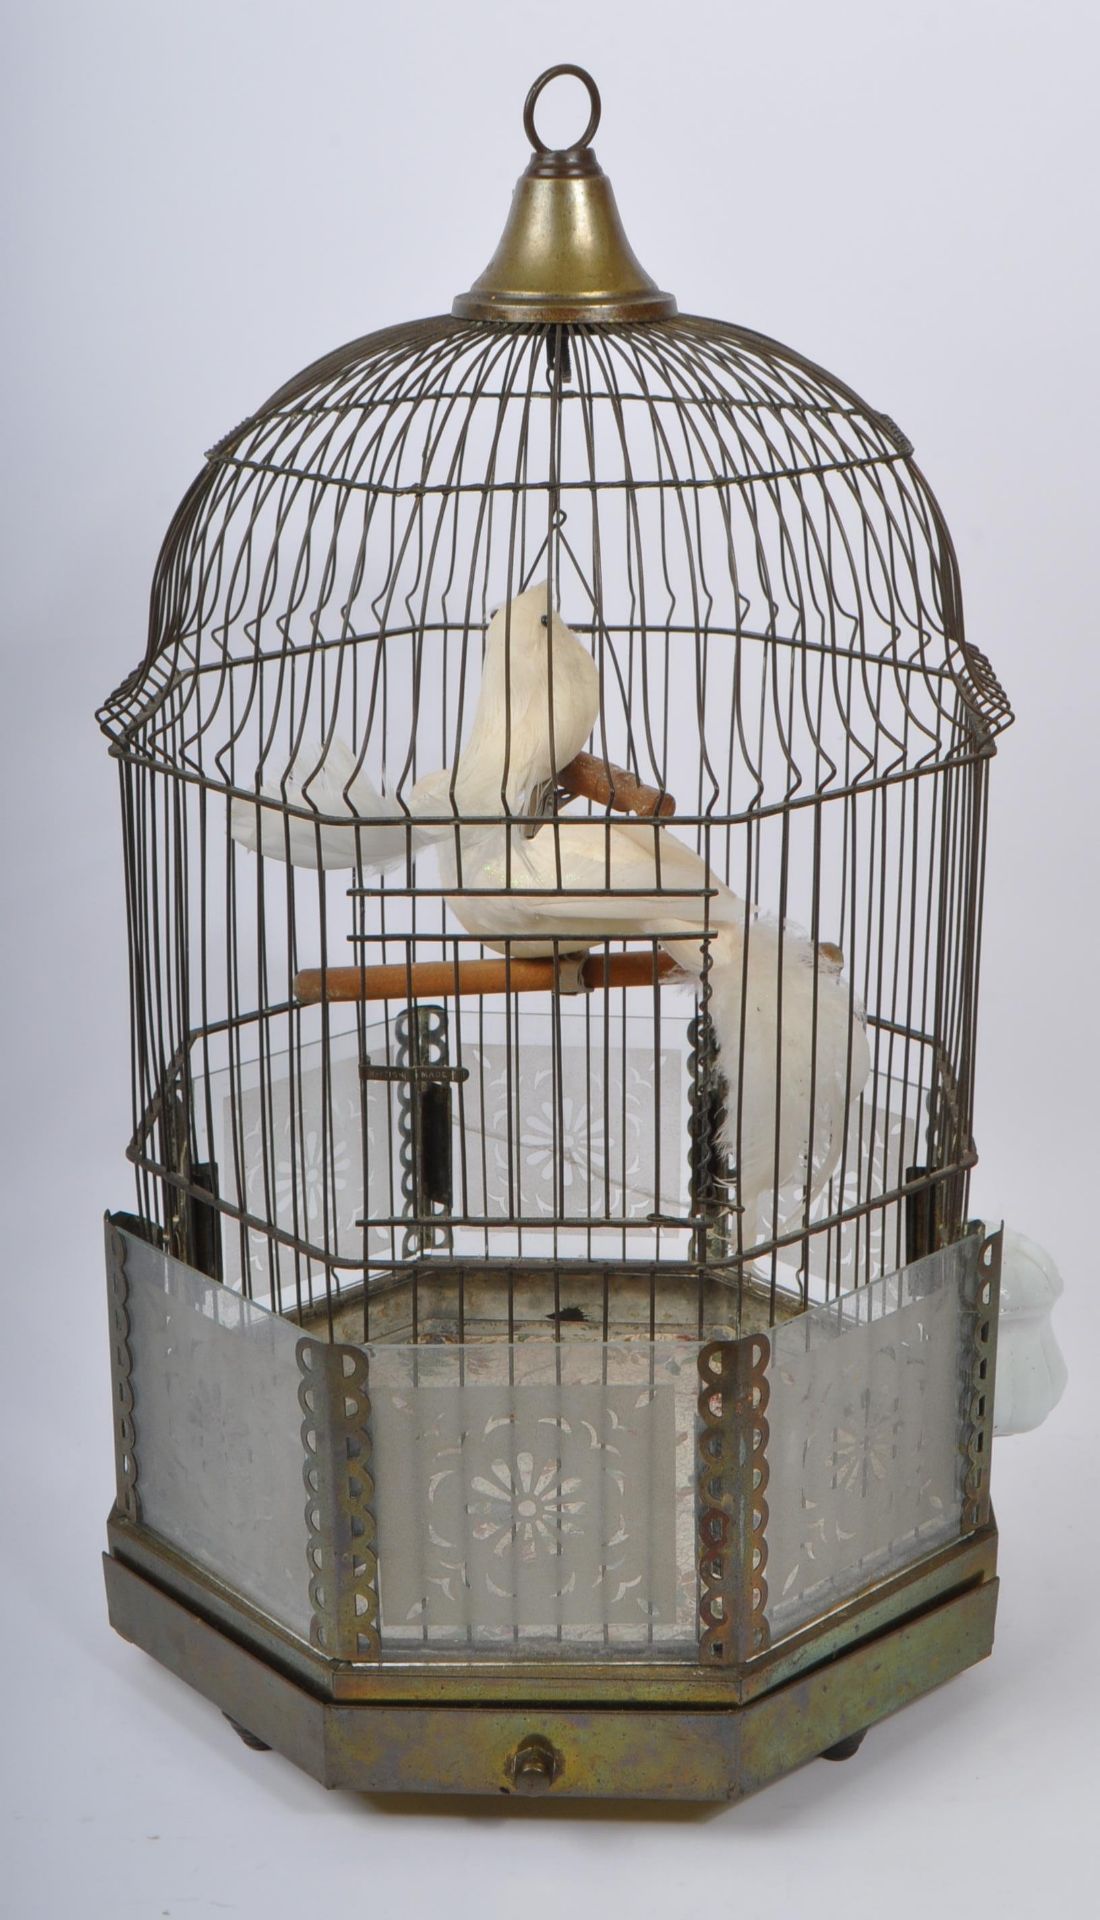 EARLY 20TH CENTURY BRASS BIRD CAGE - Image 6 of 6